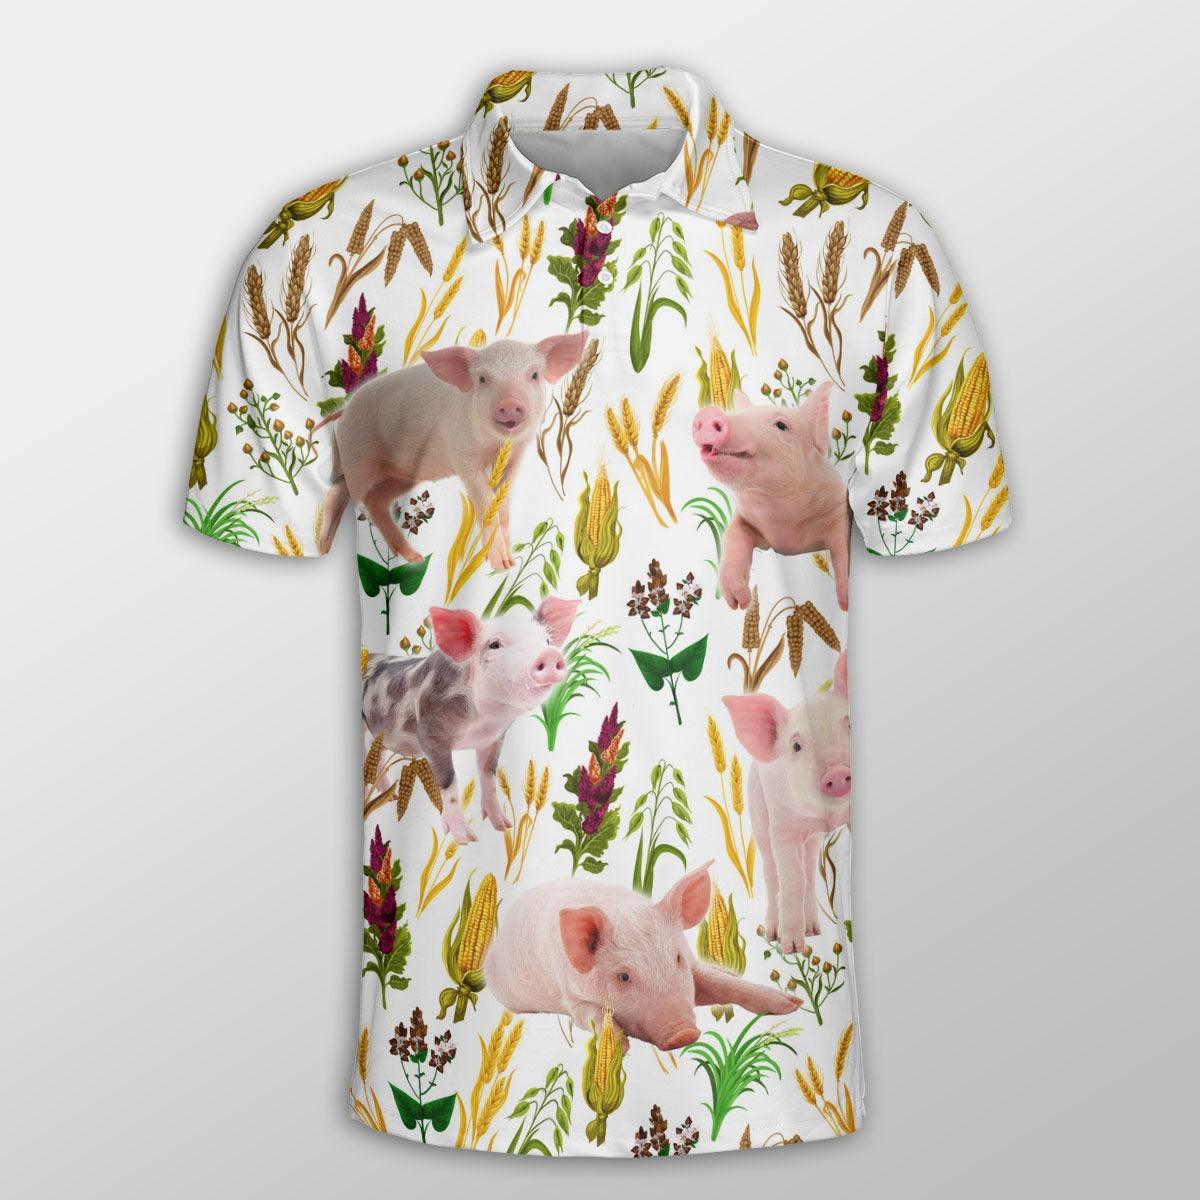 Pig Men Polo Shirt For Summer - Pig Farm Wheat Pattern Button Shirt For Men - Perfect Gift For Pig Lovers, Cattle Lovers - Amzanimalsgift